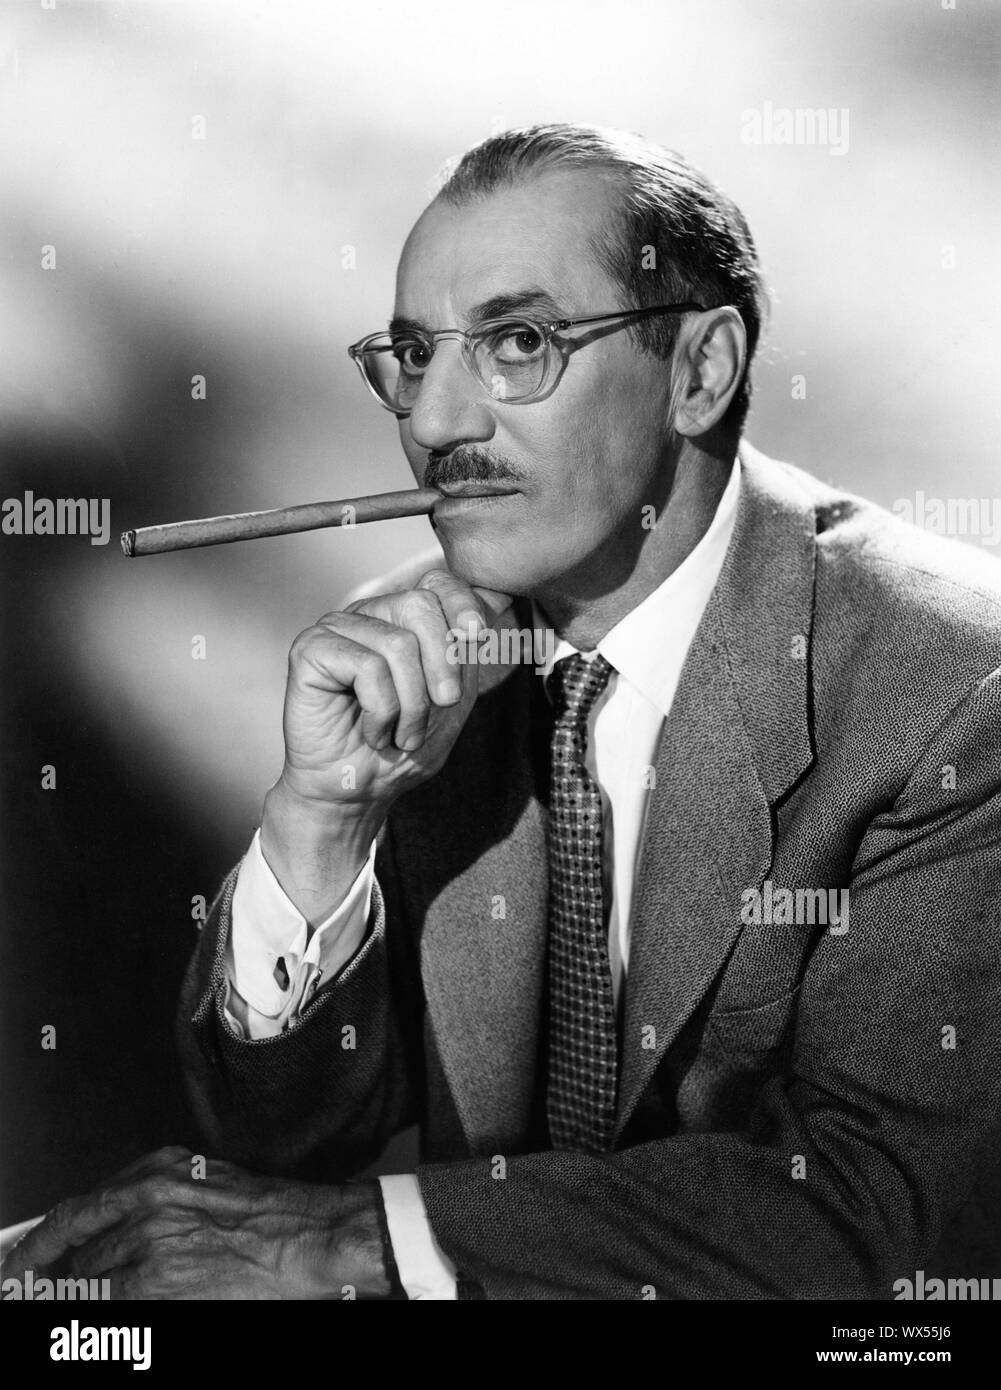 GROUCHO MARX 1960 Portrait Publicity for TV Series YOU BET YOUR LIFE NBC / National Broadcasting Corporation Stock Photo